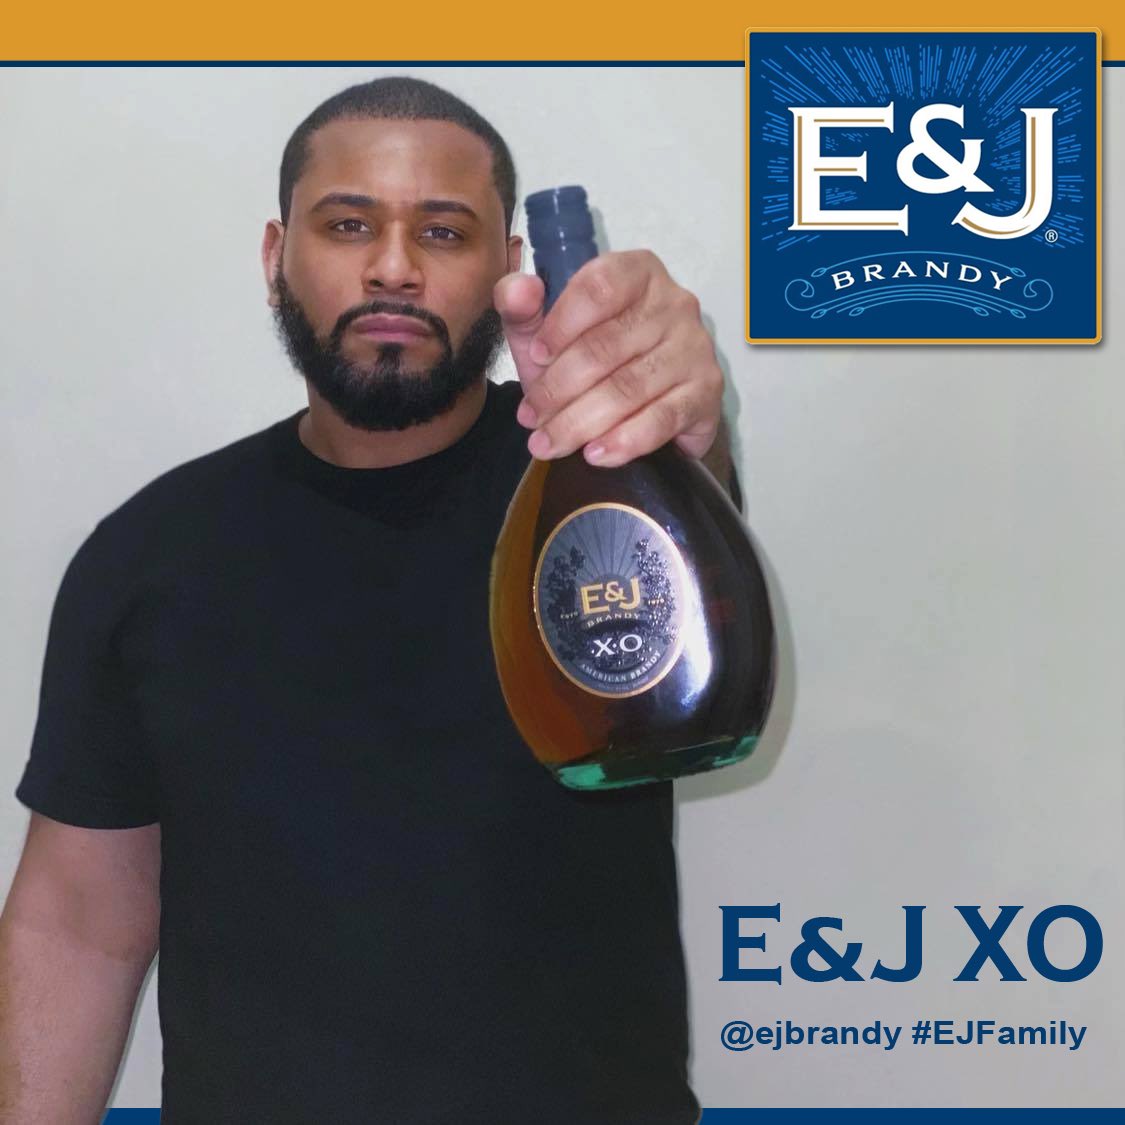 #HappyFriday to all. I want to give a shout-out to my #EJFamily. Next month I will be featured on their 'E&J Spotlight' via @Instagram. Follow them for more updates. #EJRemastered #EJSpotlight #EJXO